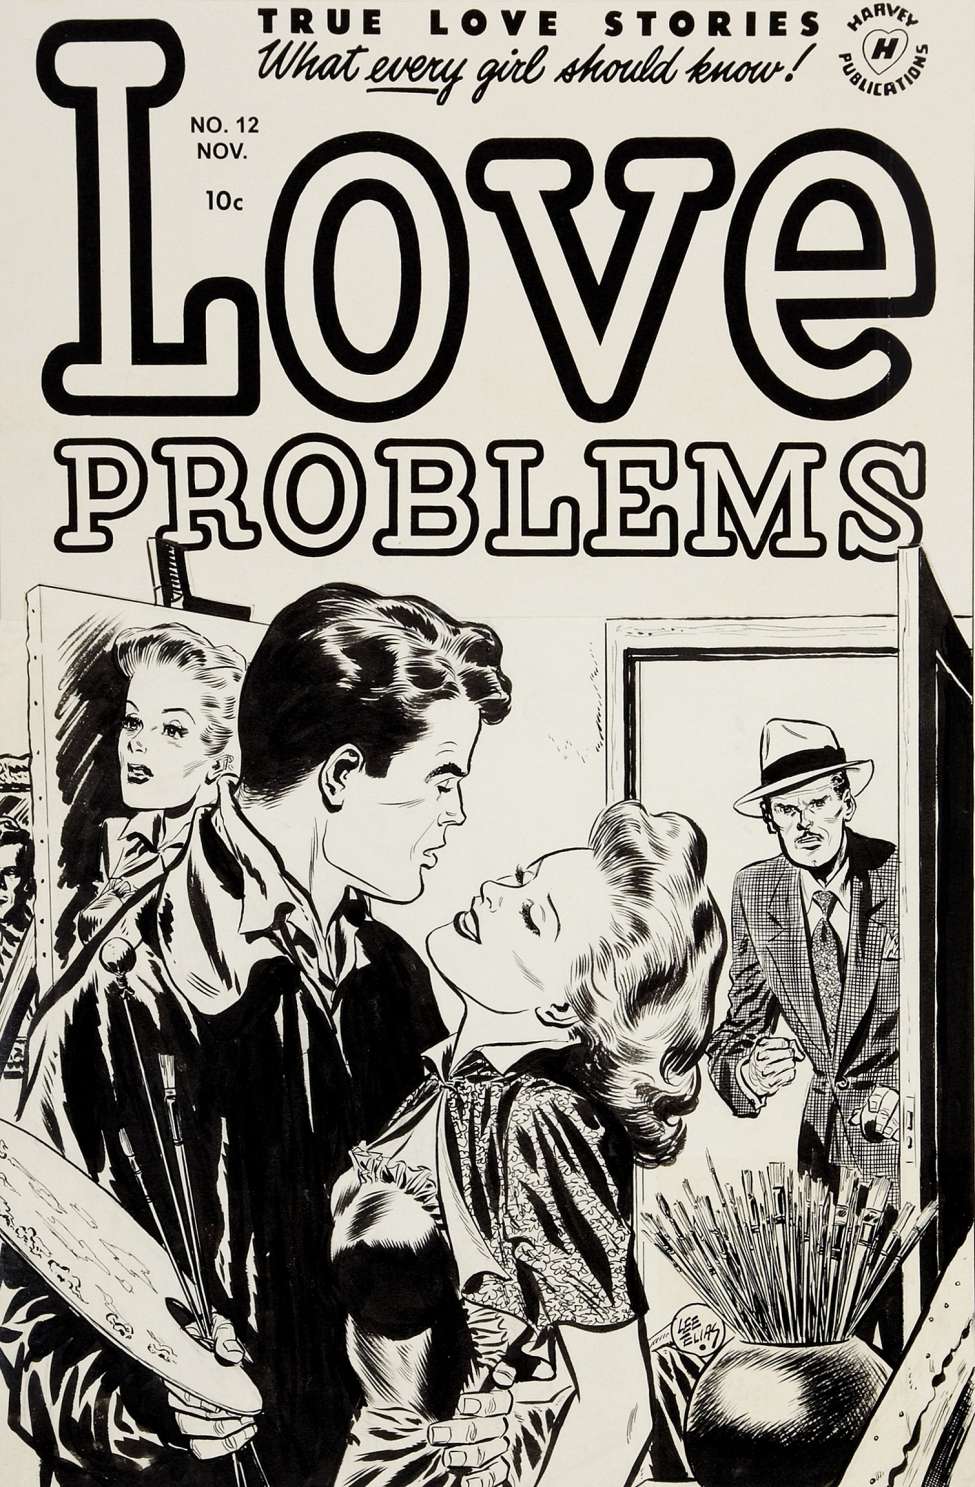 Comic Book Cover For True Love Problems and Advice Illustrated 11 (Special Edition) - Version 2